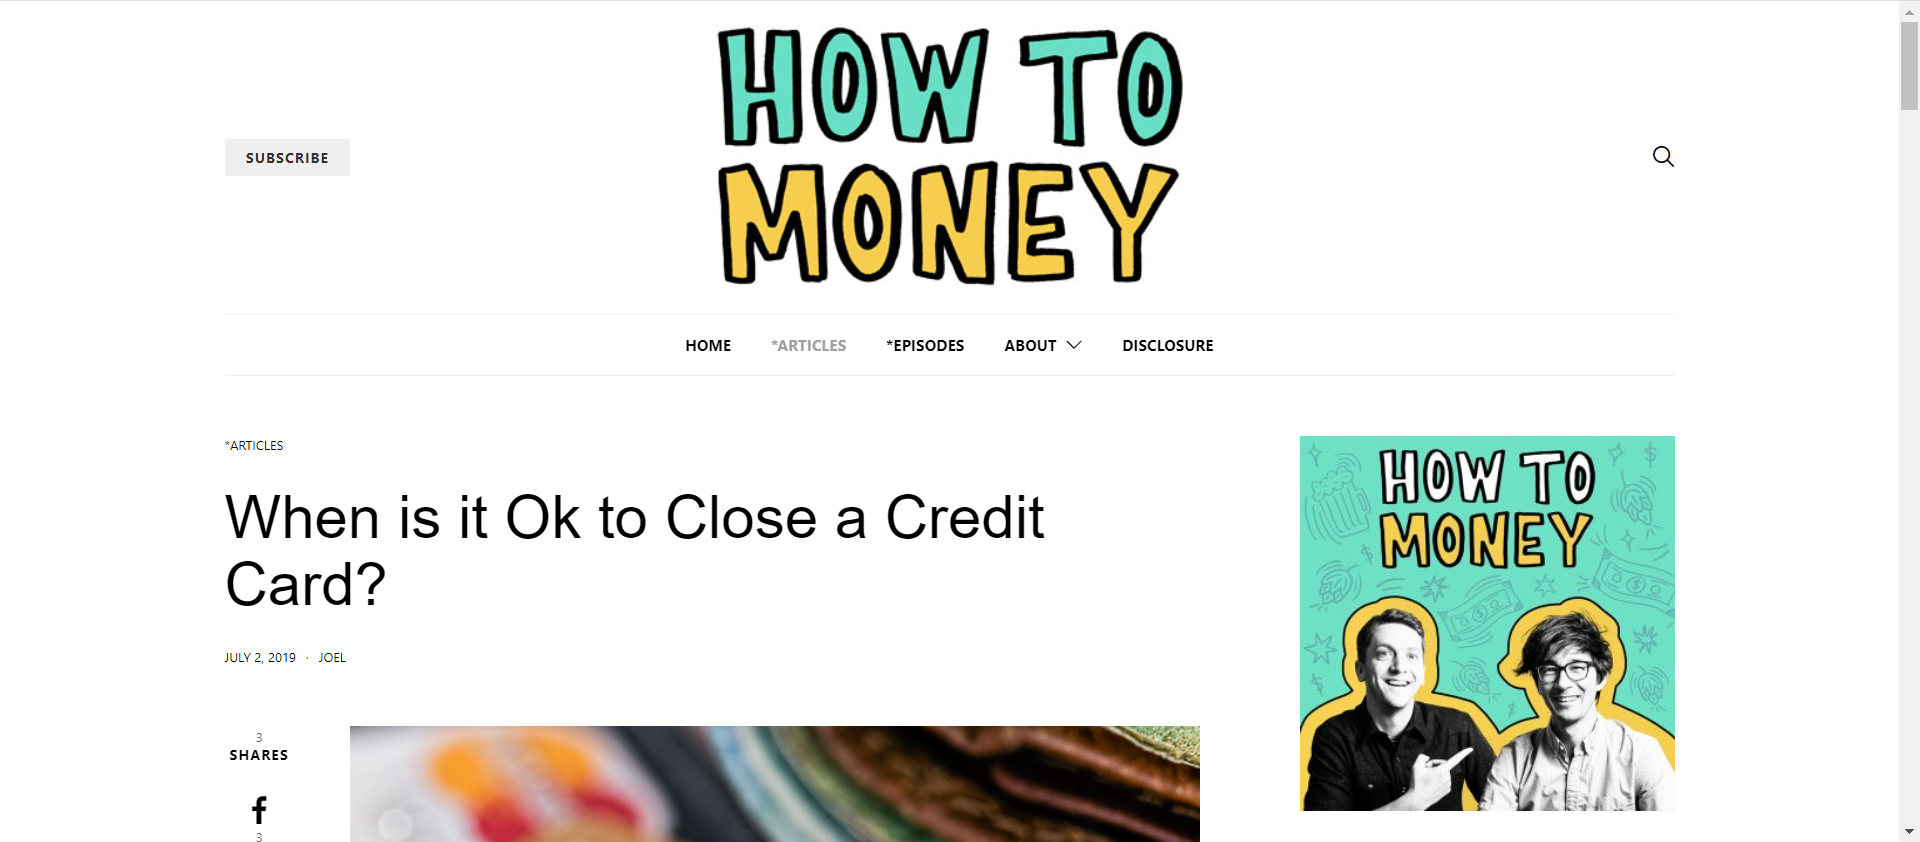 How to Money Closing Credit Cards